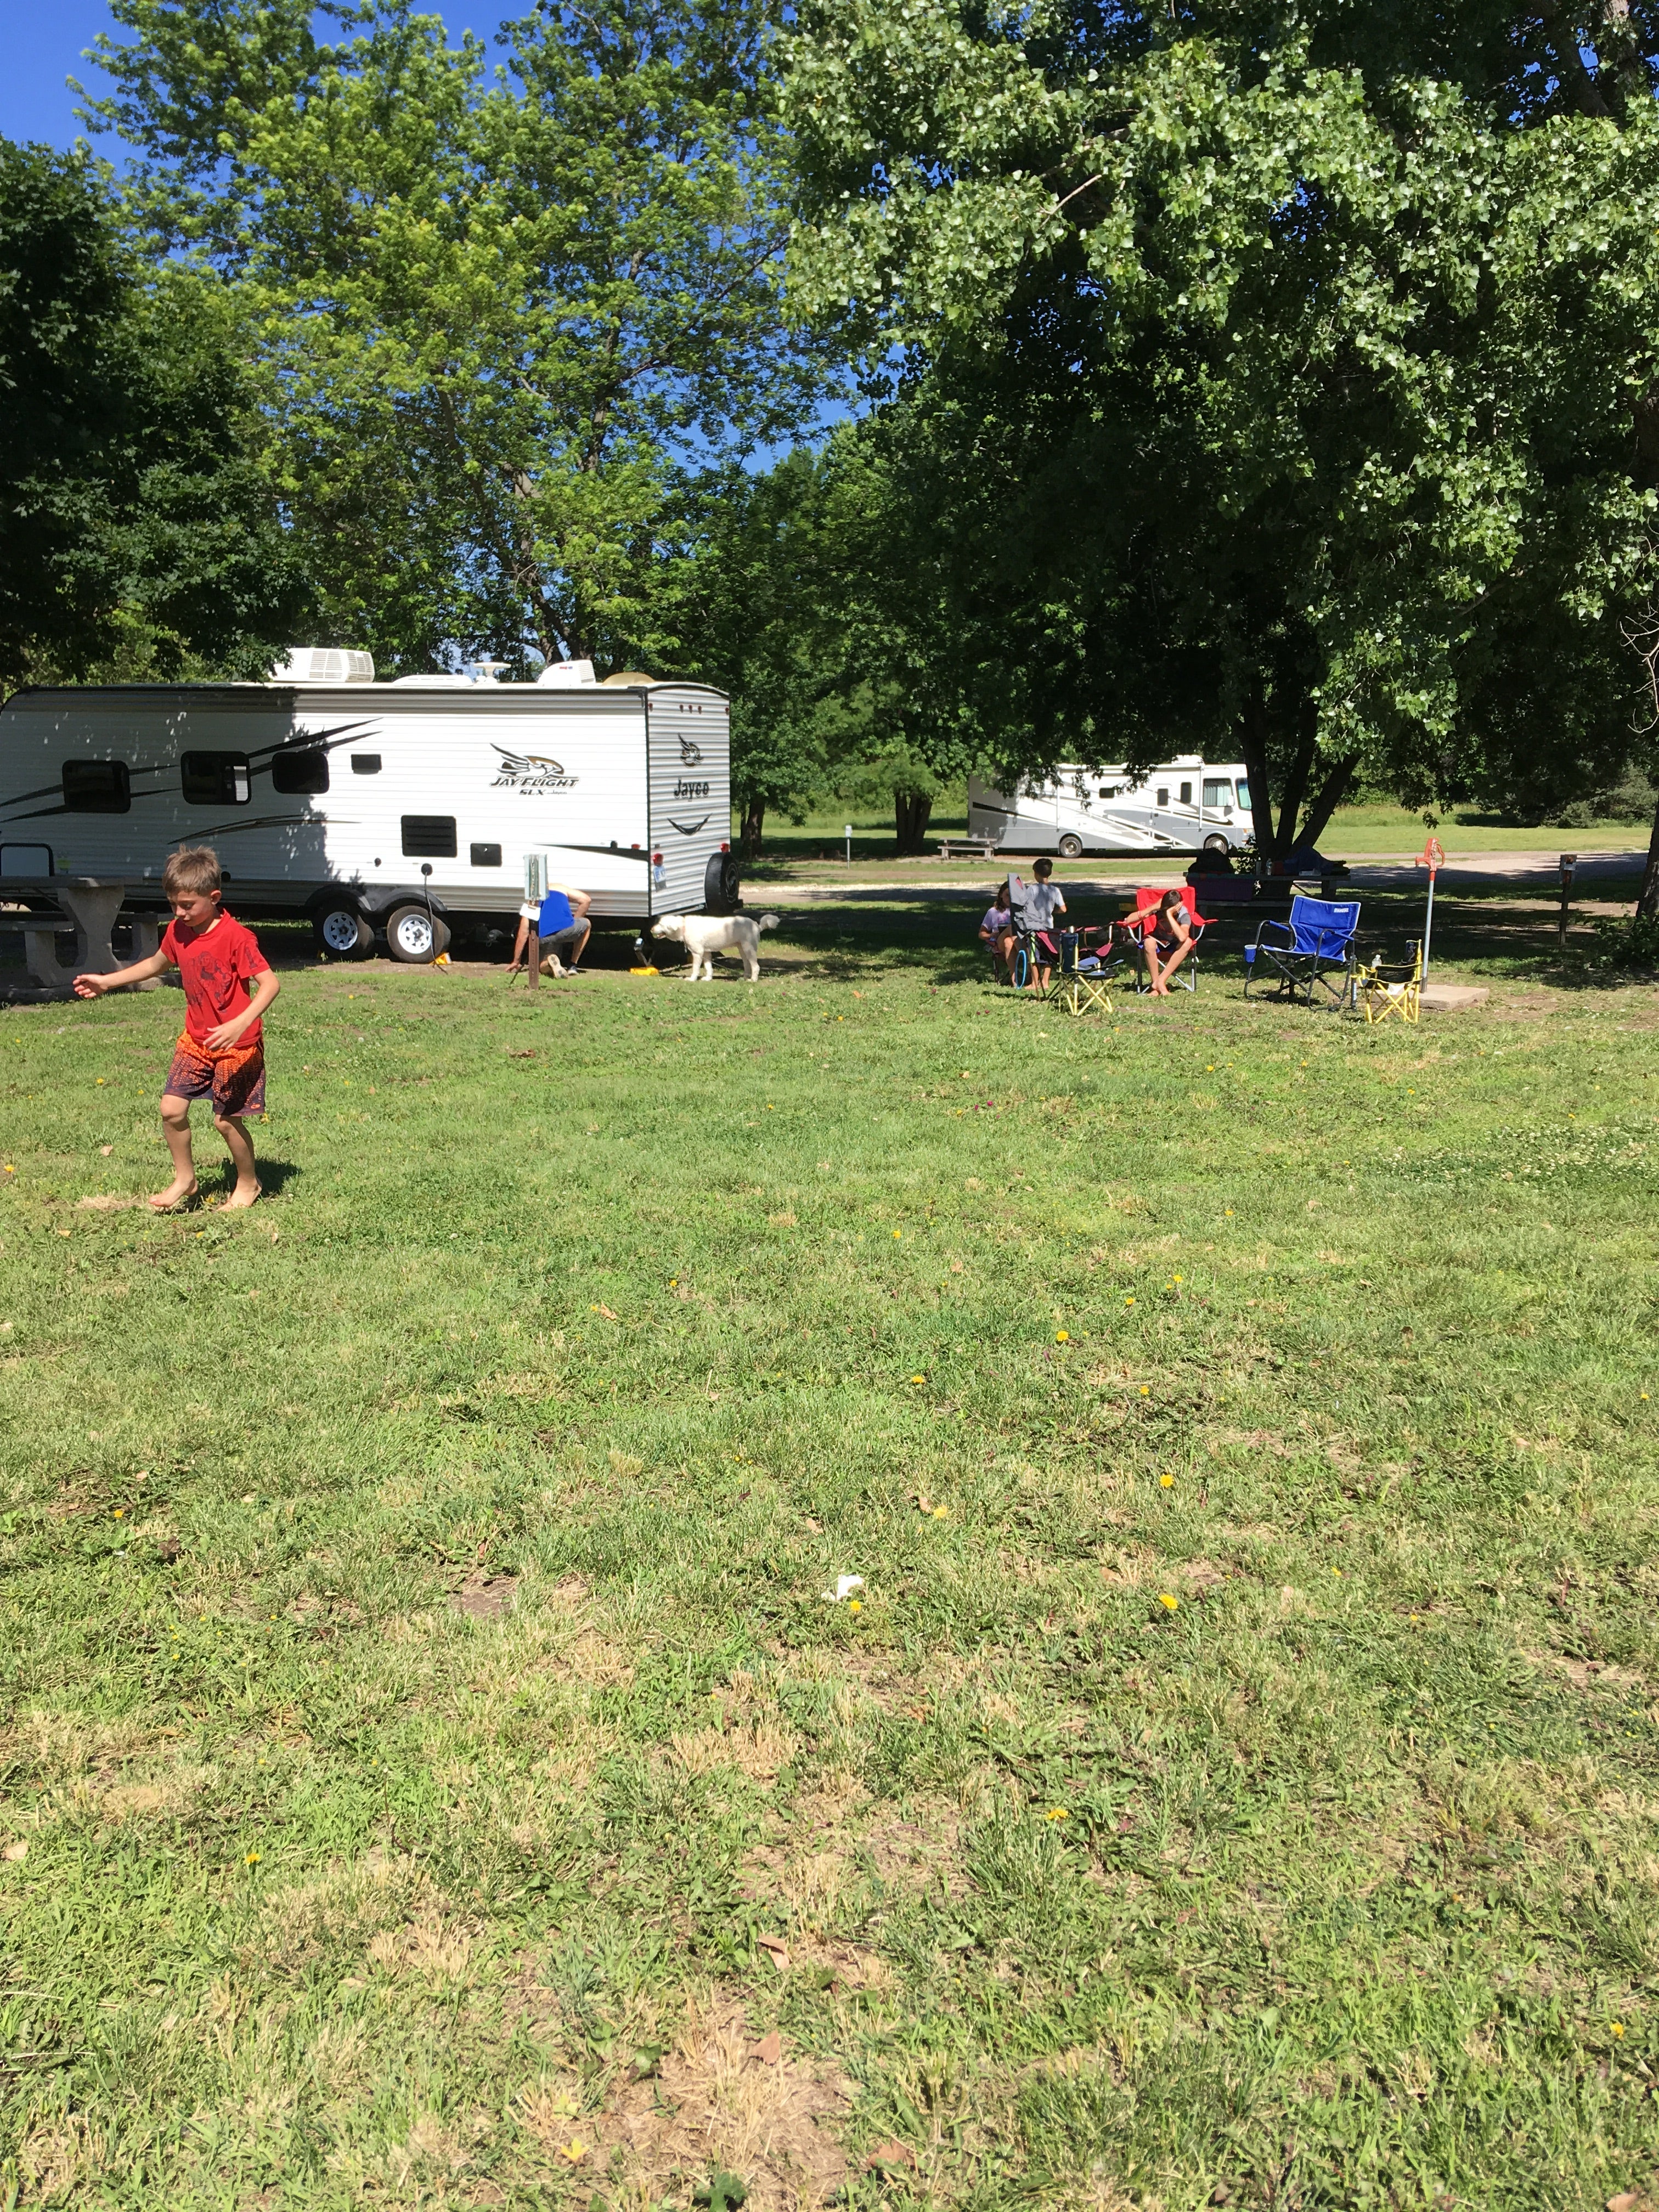 Clean camper area with grass to play on.